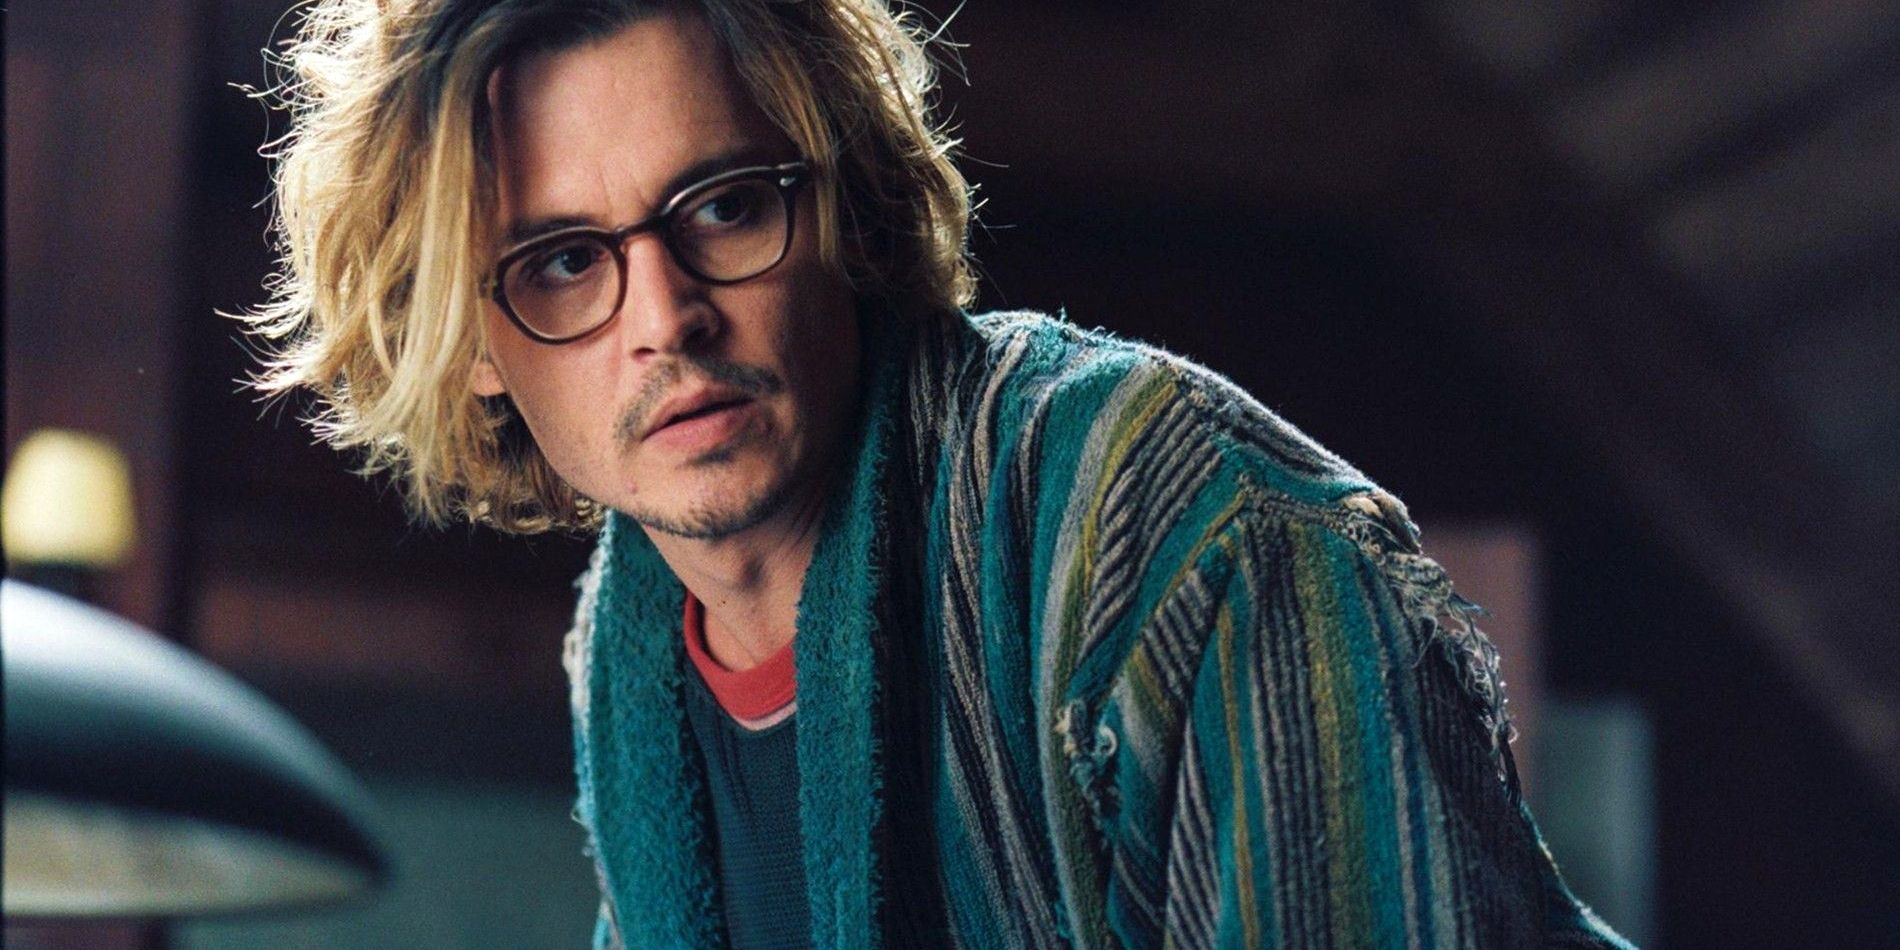 Johnny Depp in The Secret Window wearing a robe and glasses and looking off to the side.